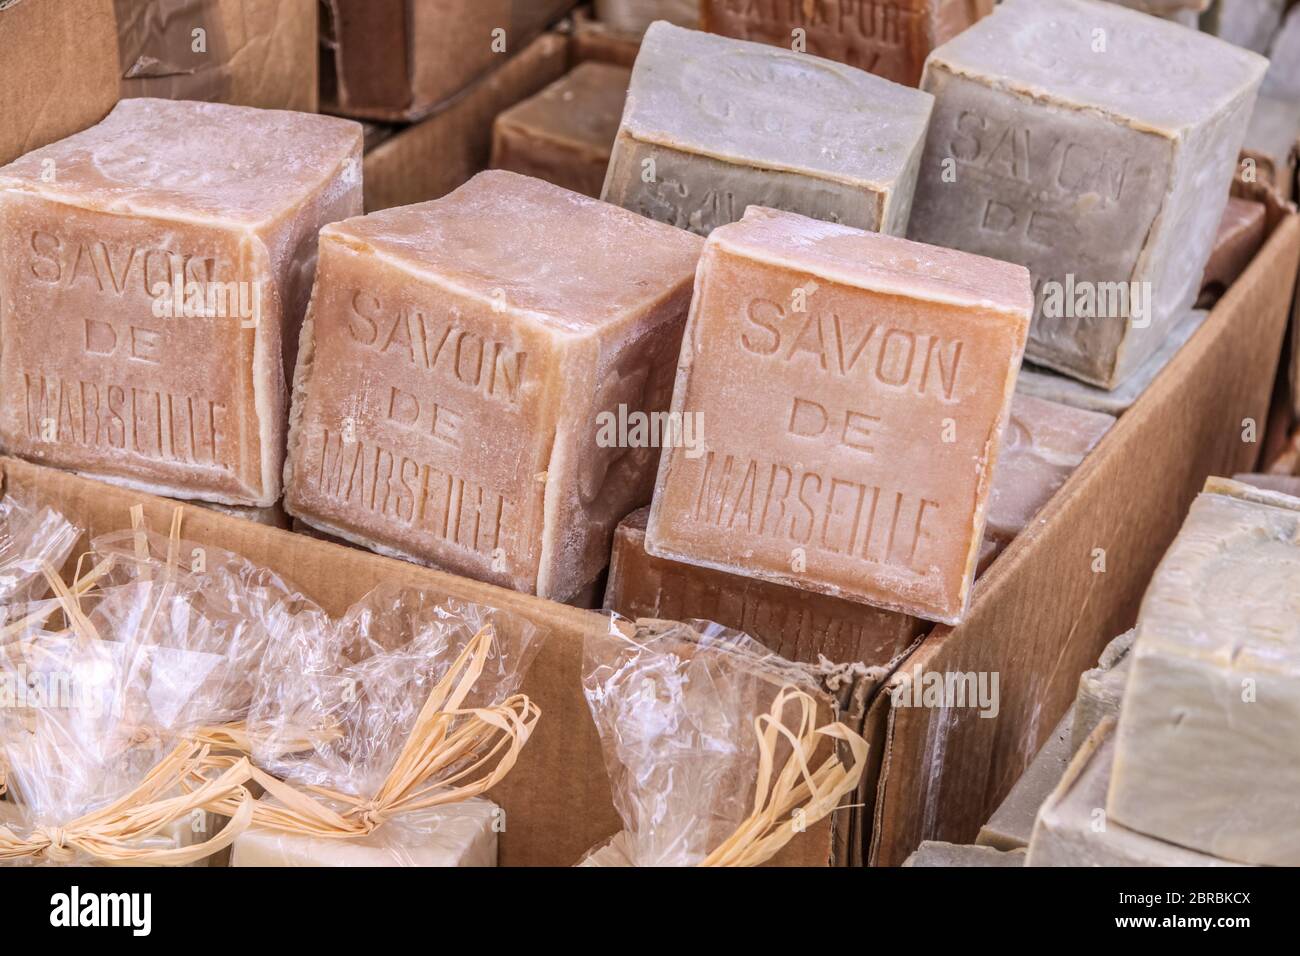 Rustic soaps in the village of Gordes, Provence, France Stock Photo